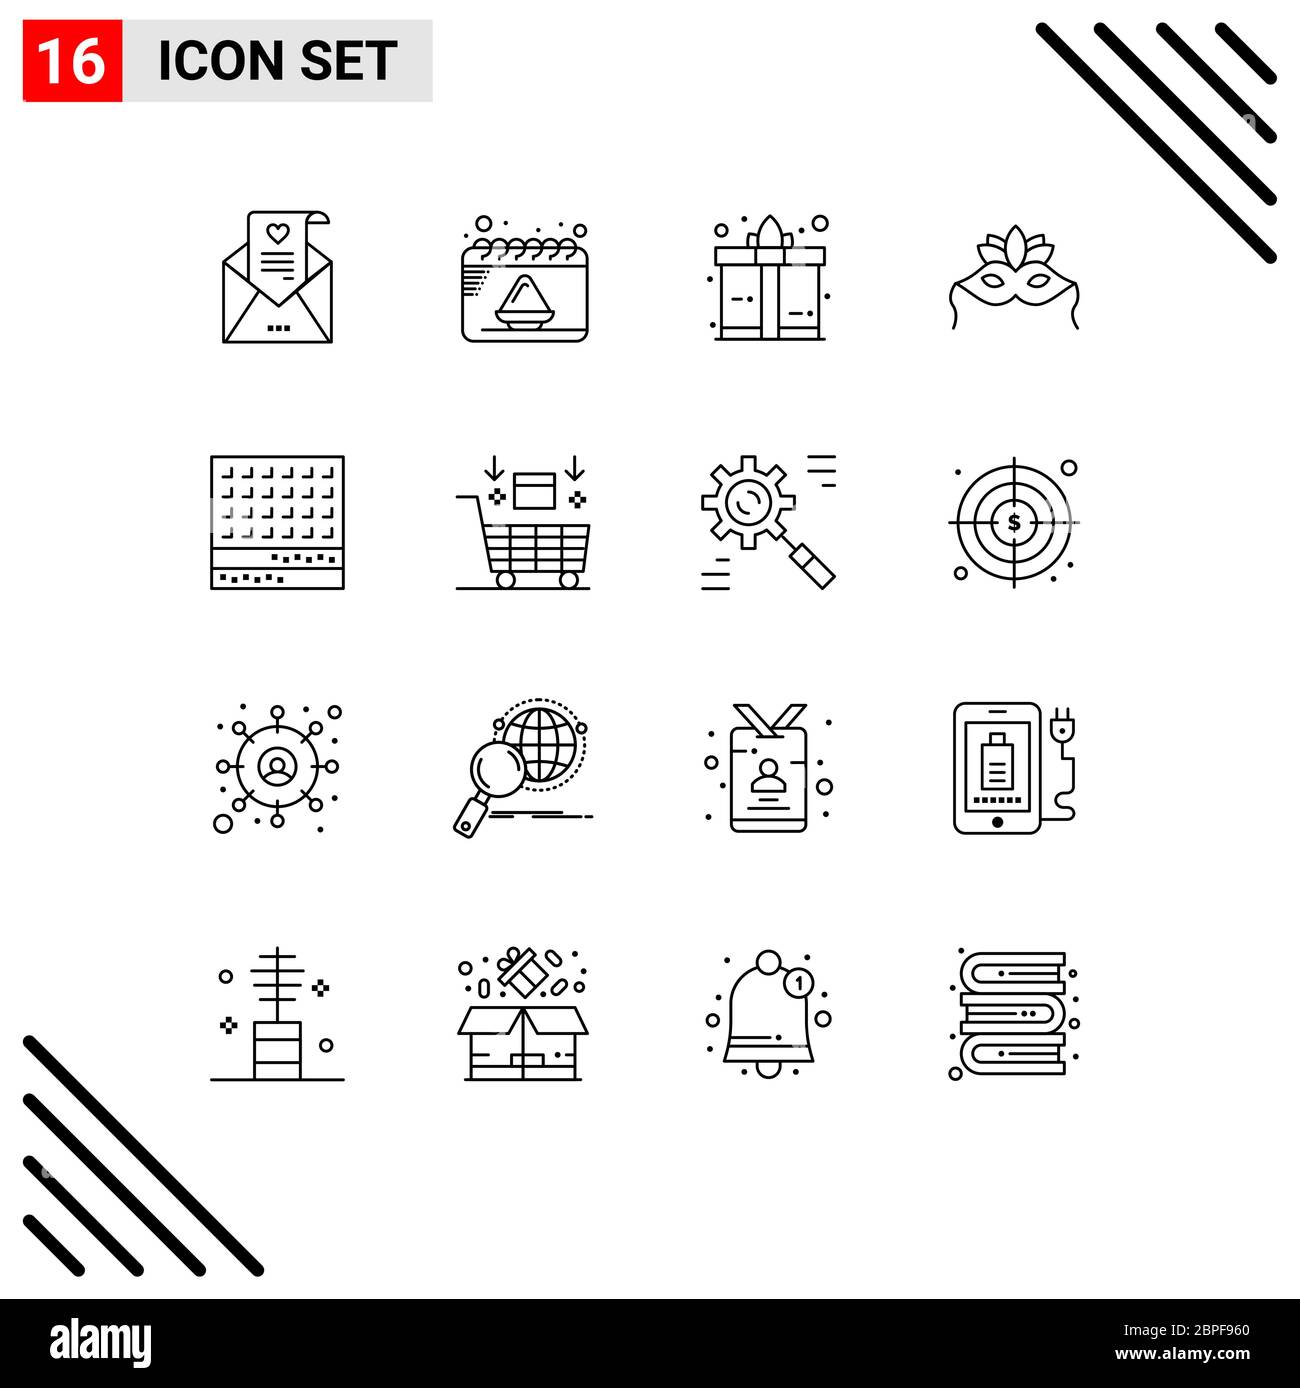 User Interface Pack of 16 Basic Outlines of sweet, biscuit, box, mardigras, costume Editable Vector Design Elements Stock Vector